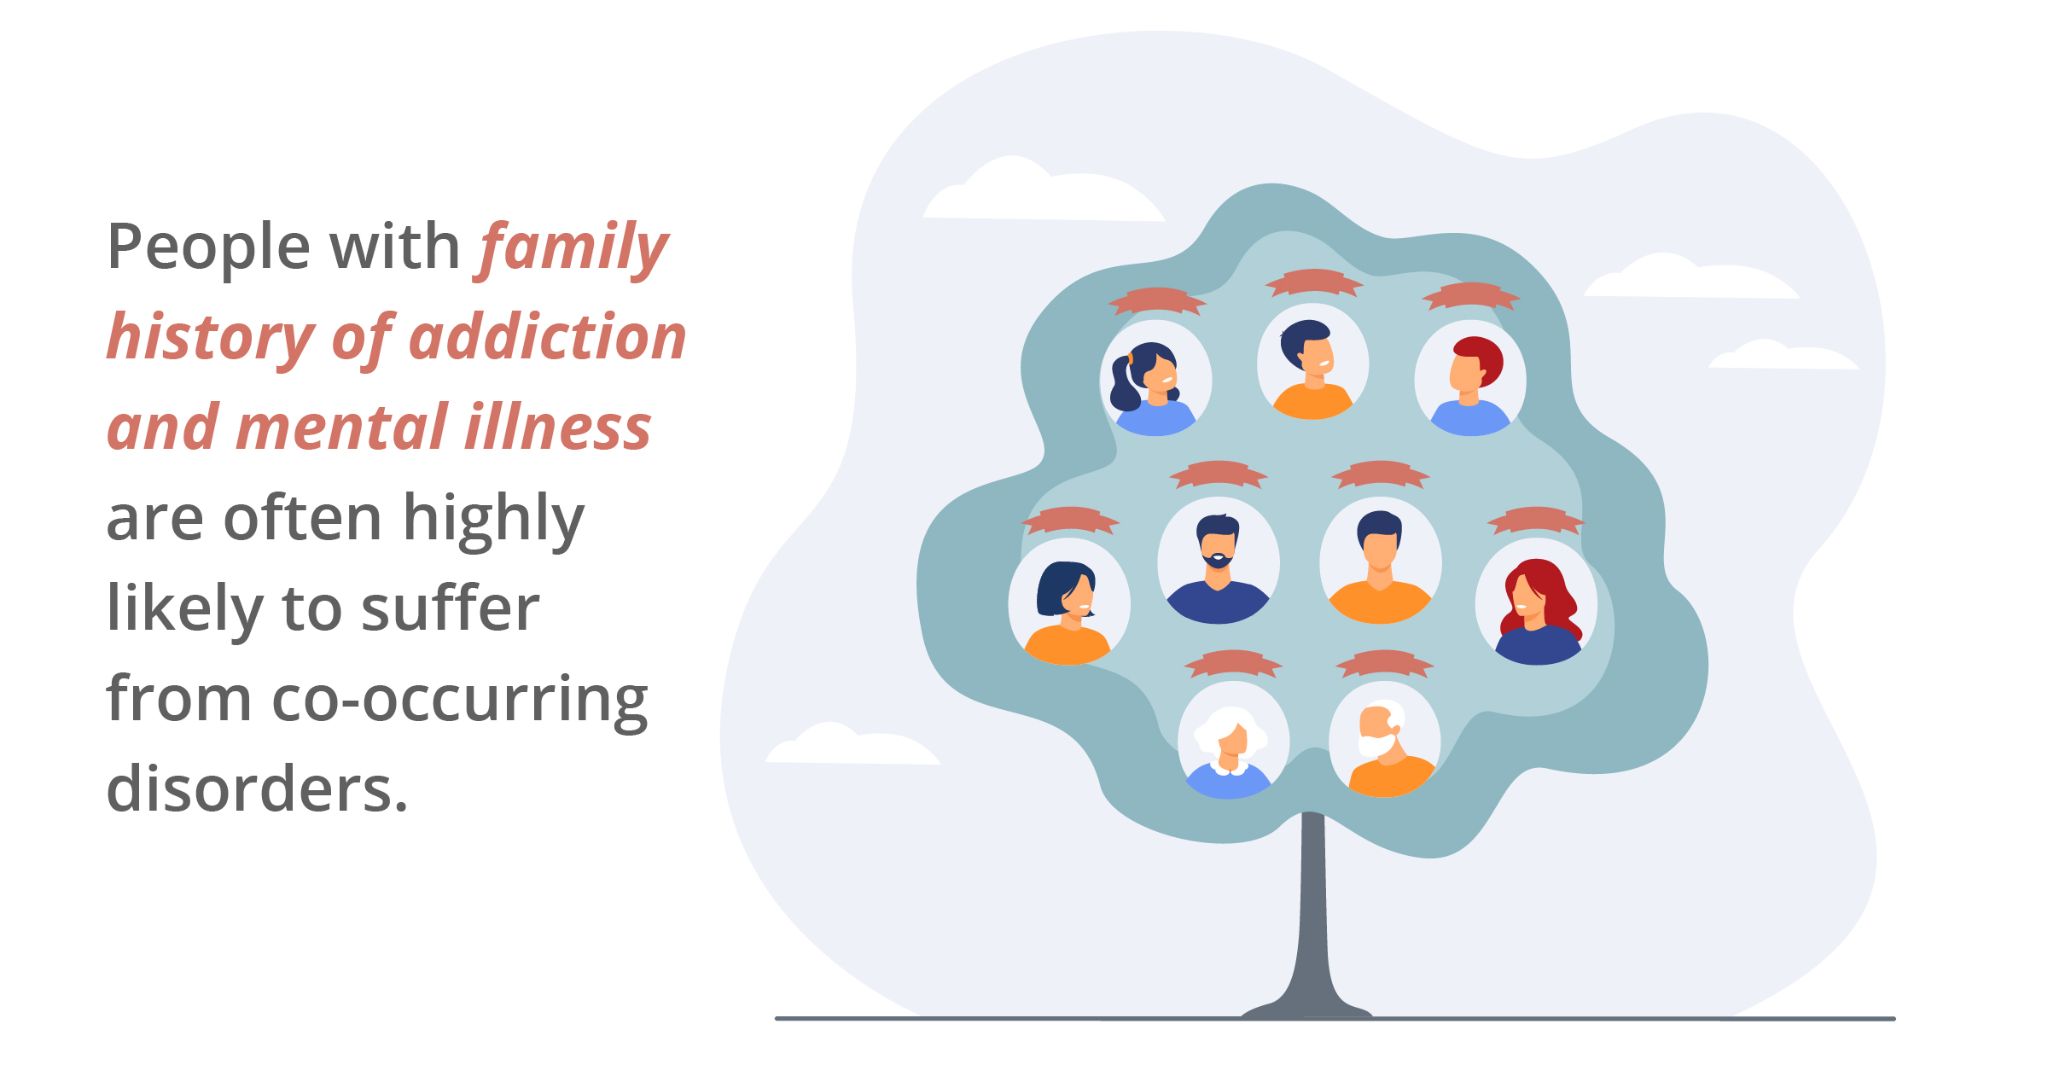 people with family history of addiction and mental illness are often highly likely to suffer from co-occurring disorders